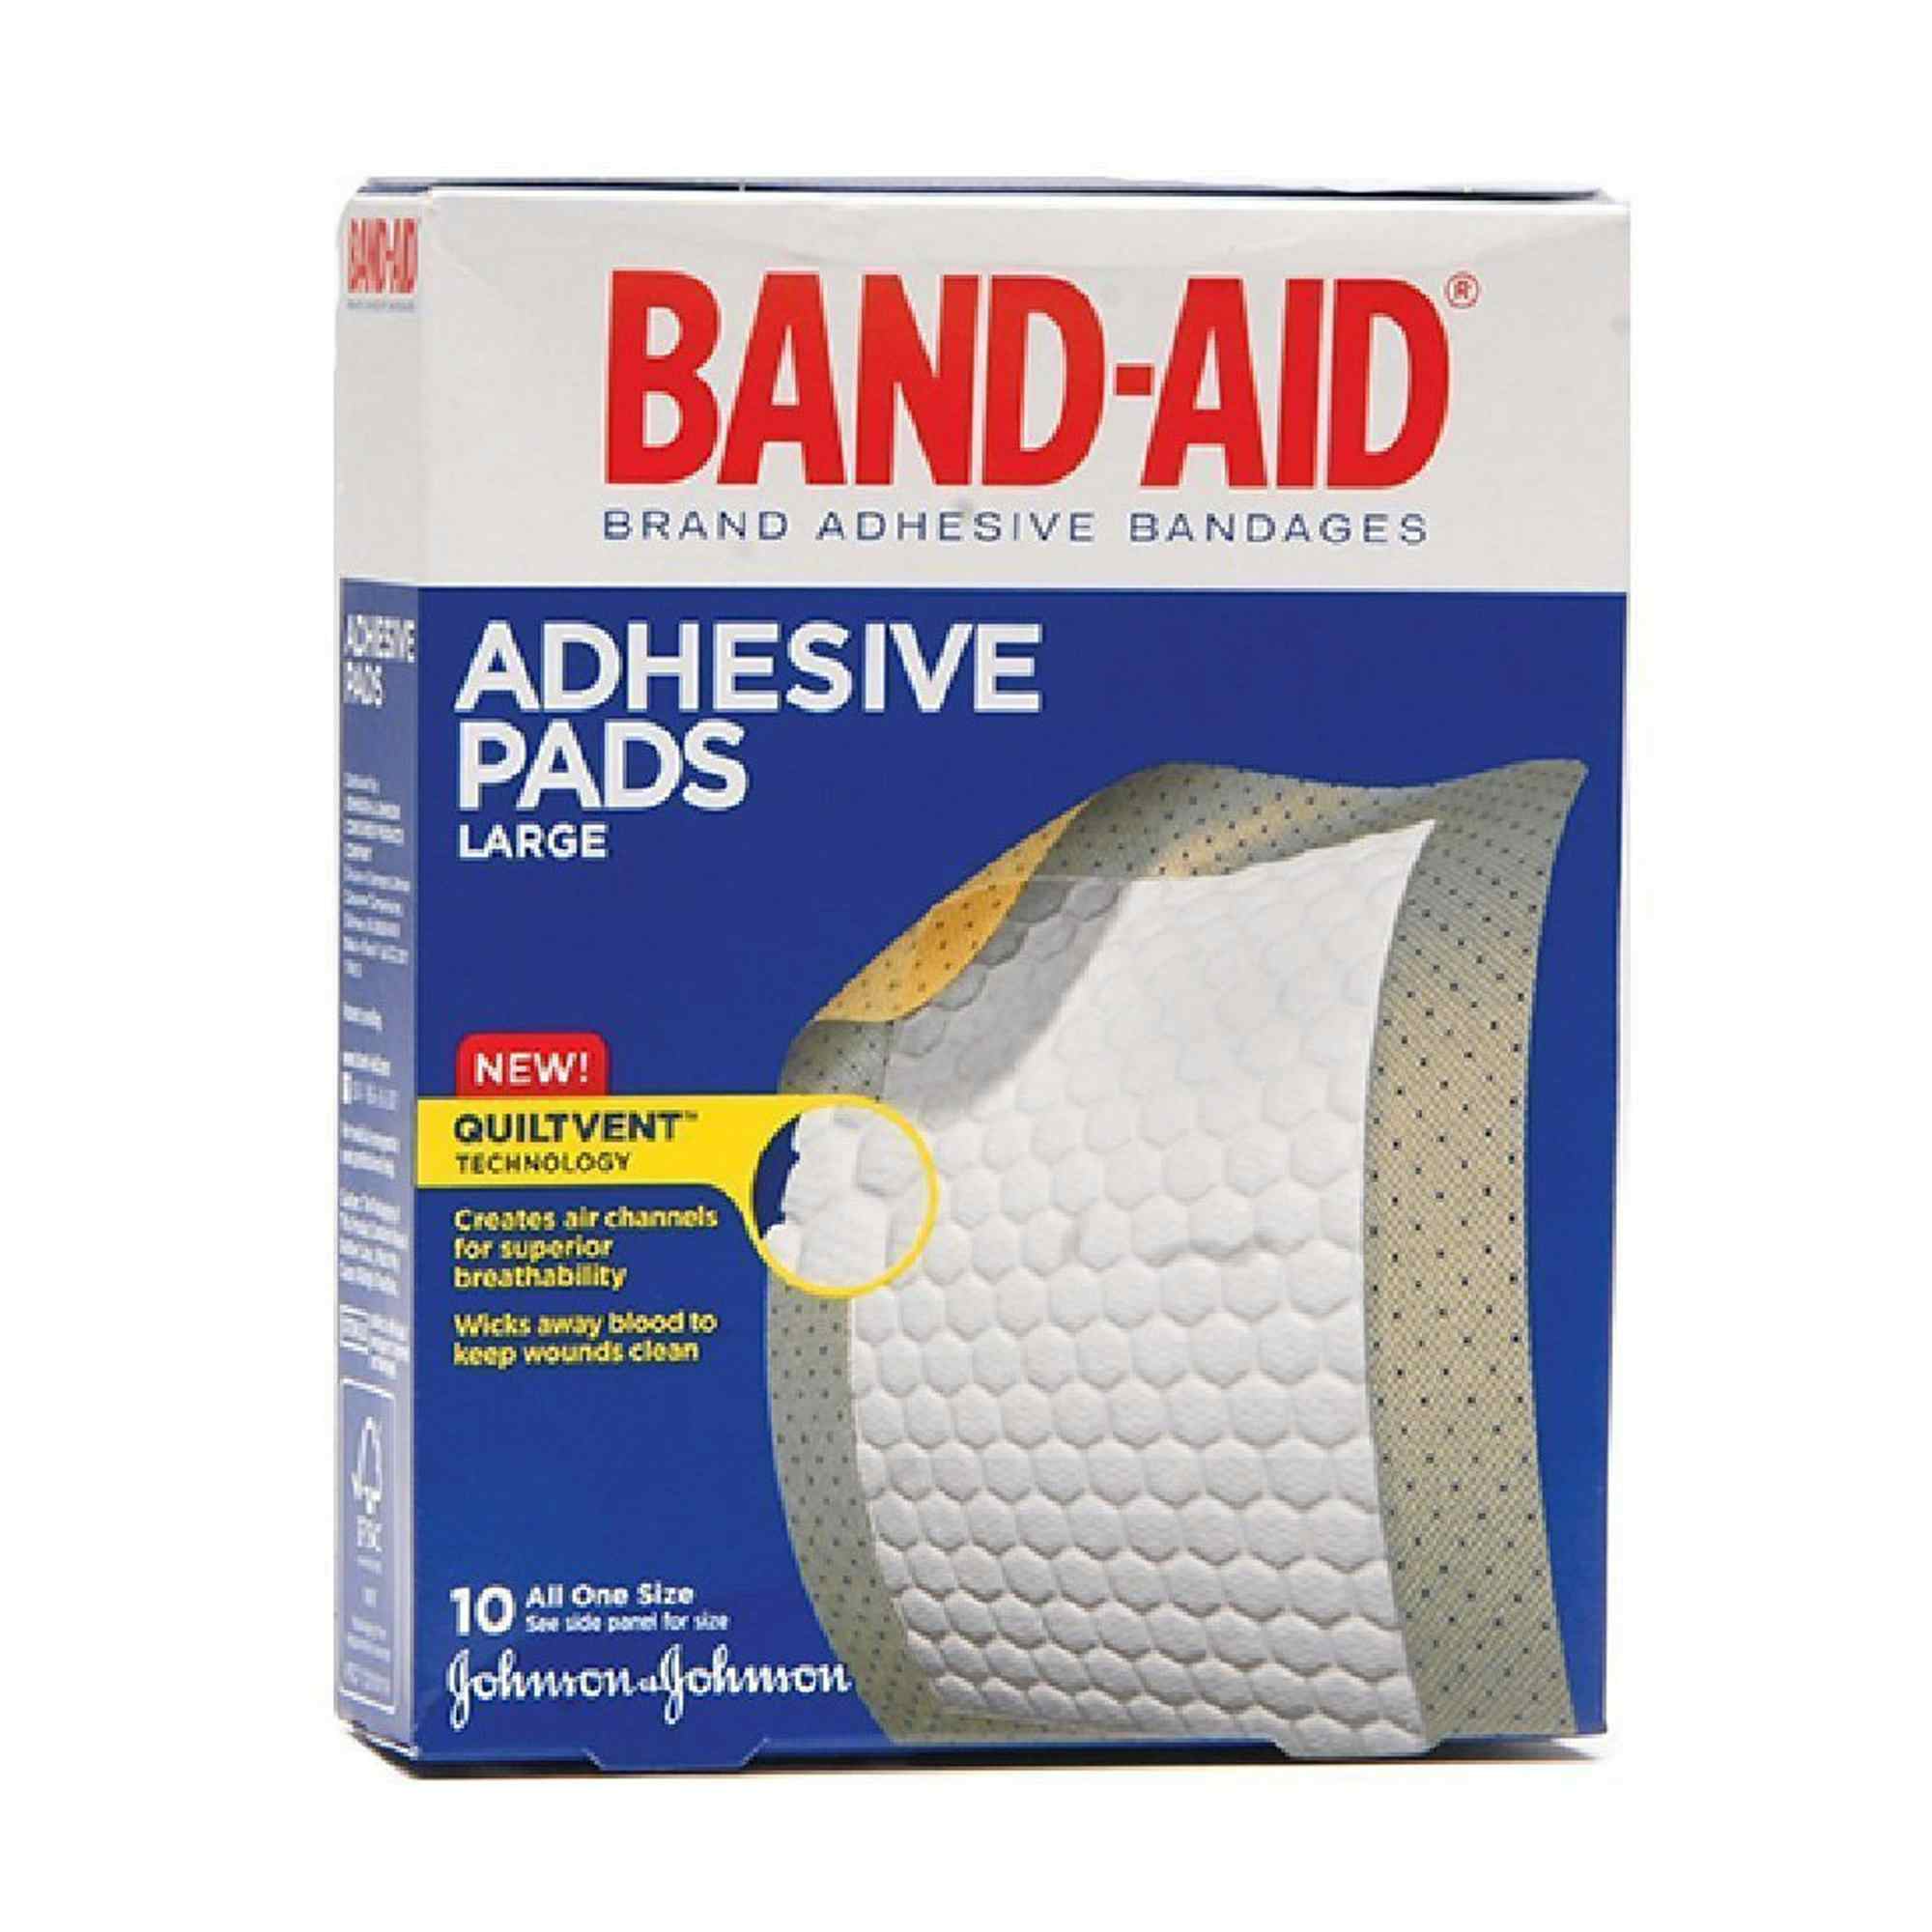 Band-Aid Adhesive Pads Large with Quiltvent Technology, 2-7/8 X 4", 00381371183388, Box of 10